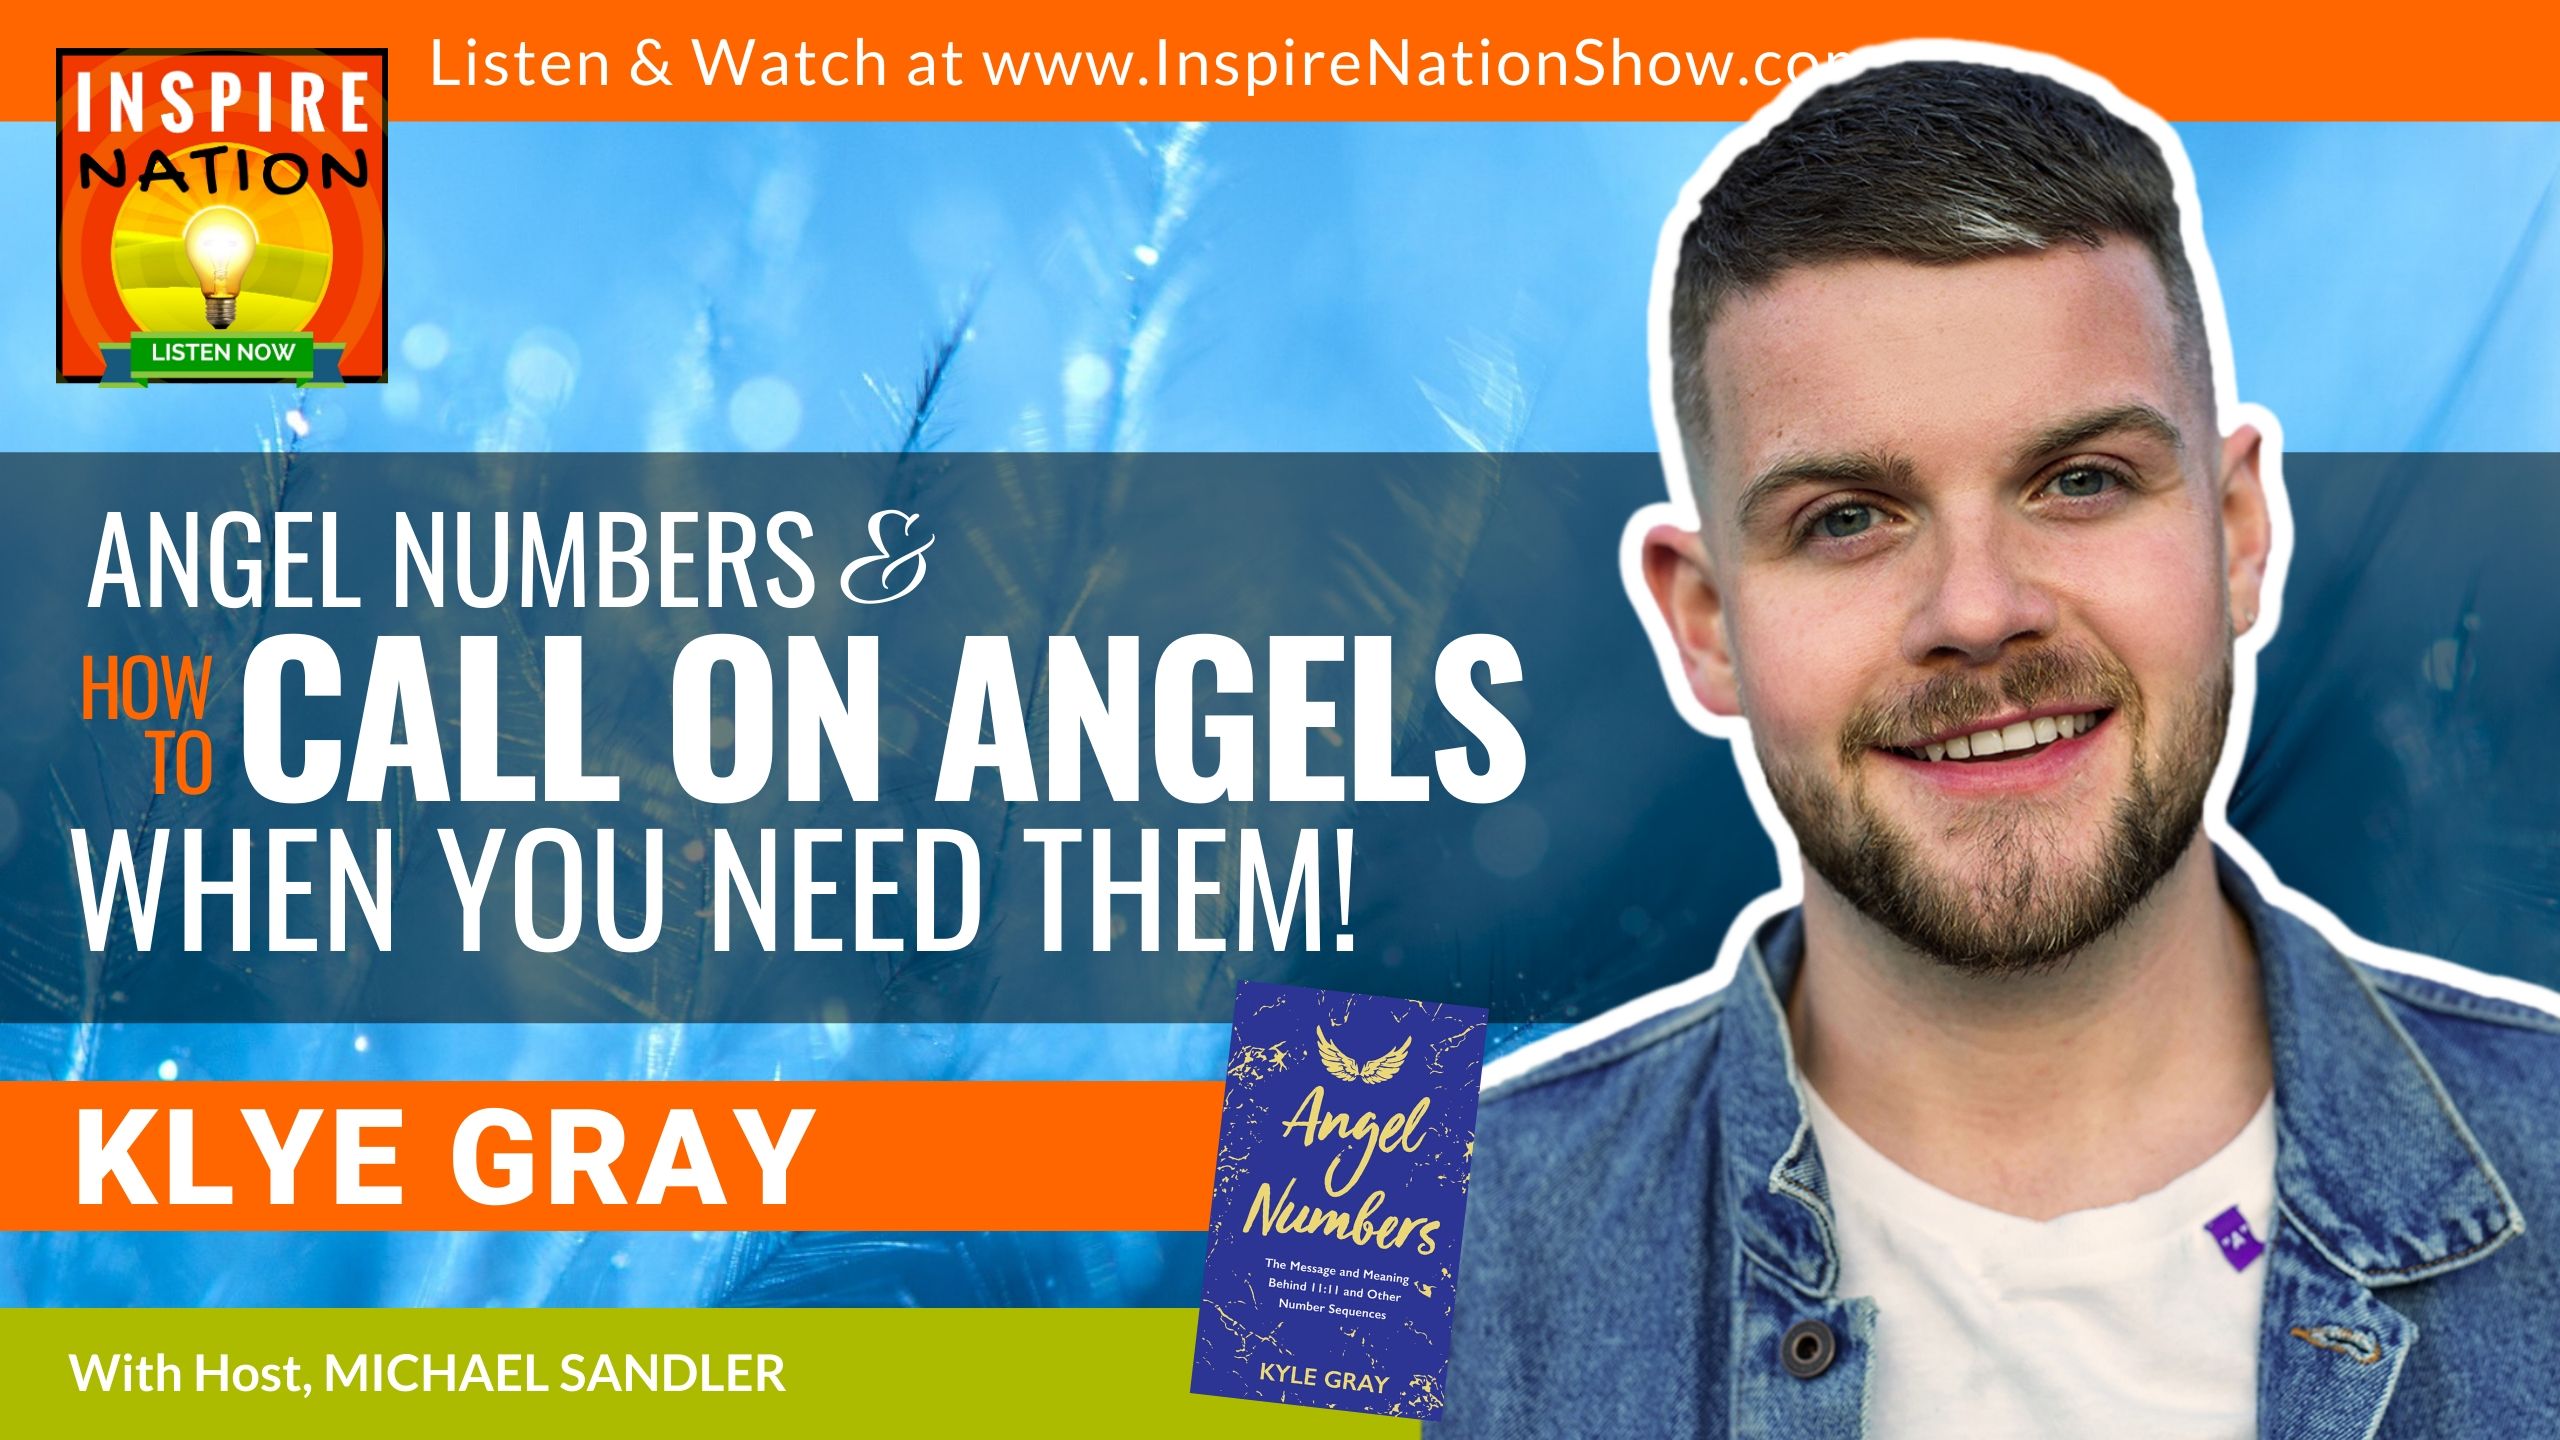 Michael Sandler interviews Kyle Gray on Angel Numbers, repeating numbers and what the angels are trying to tell you!